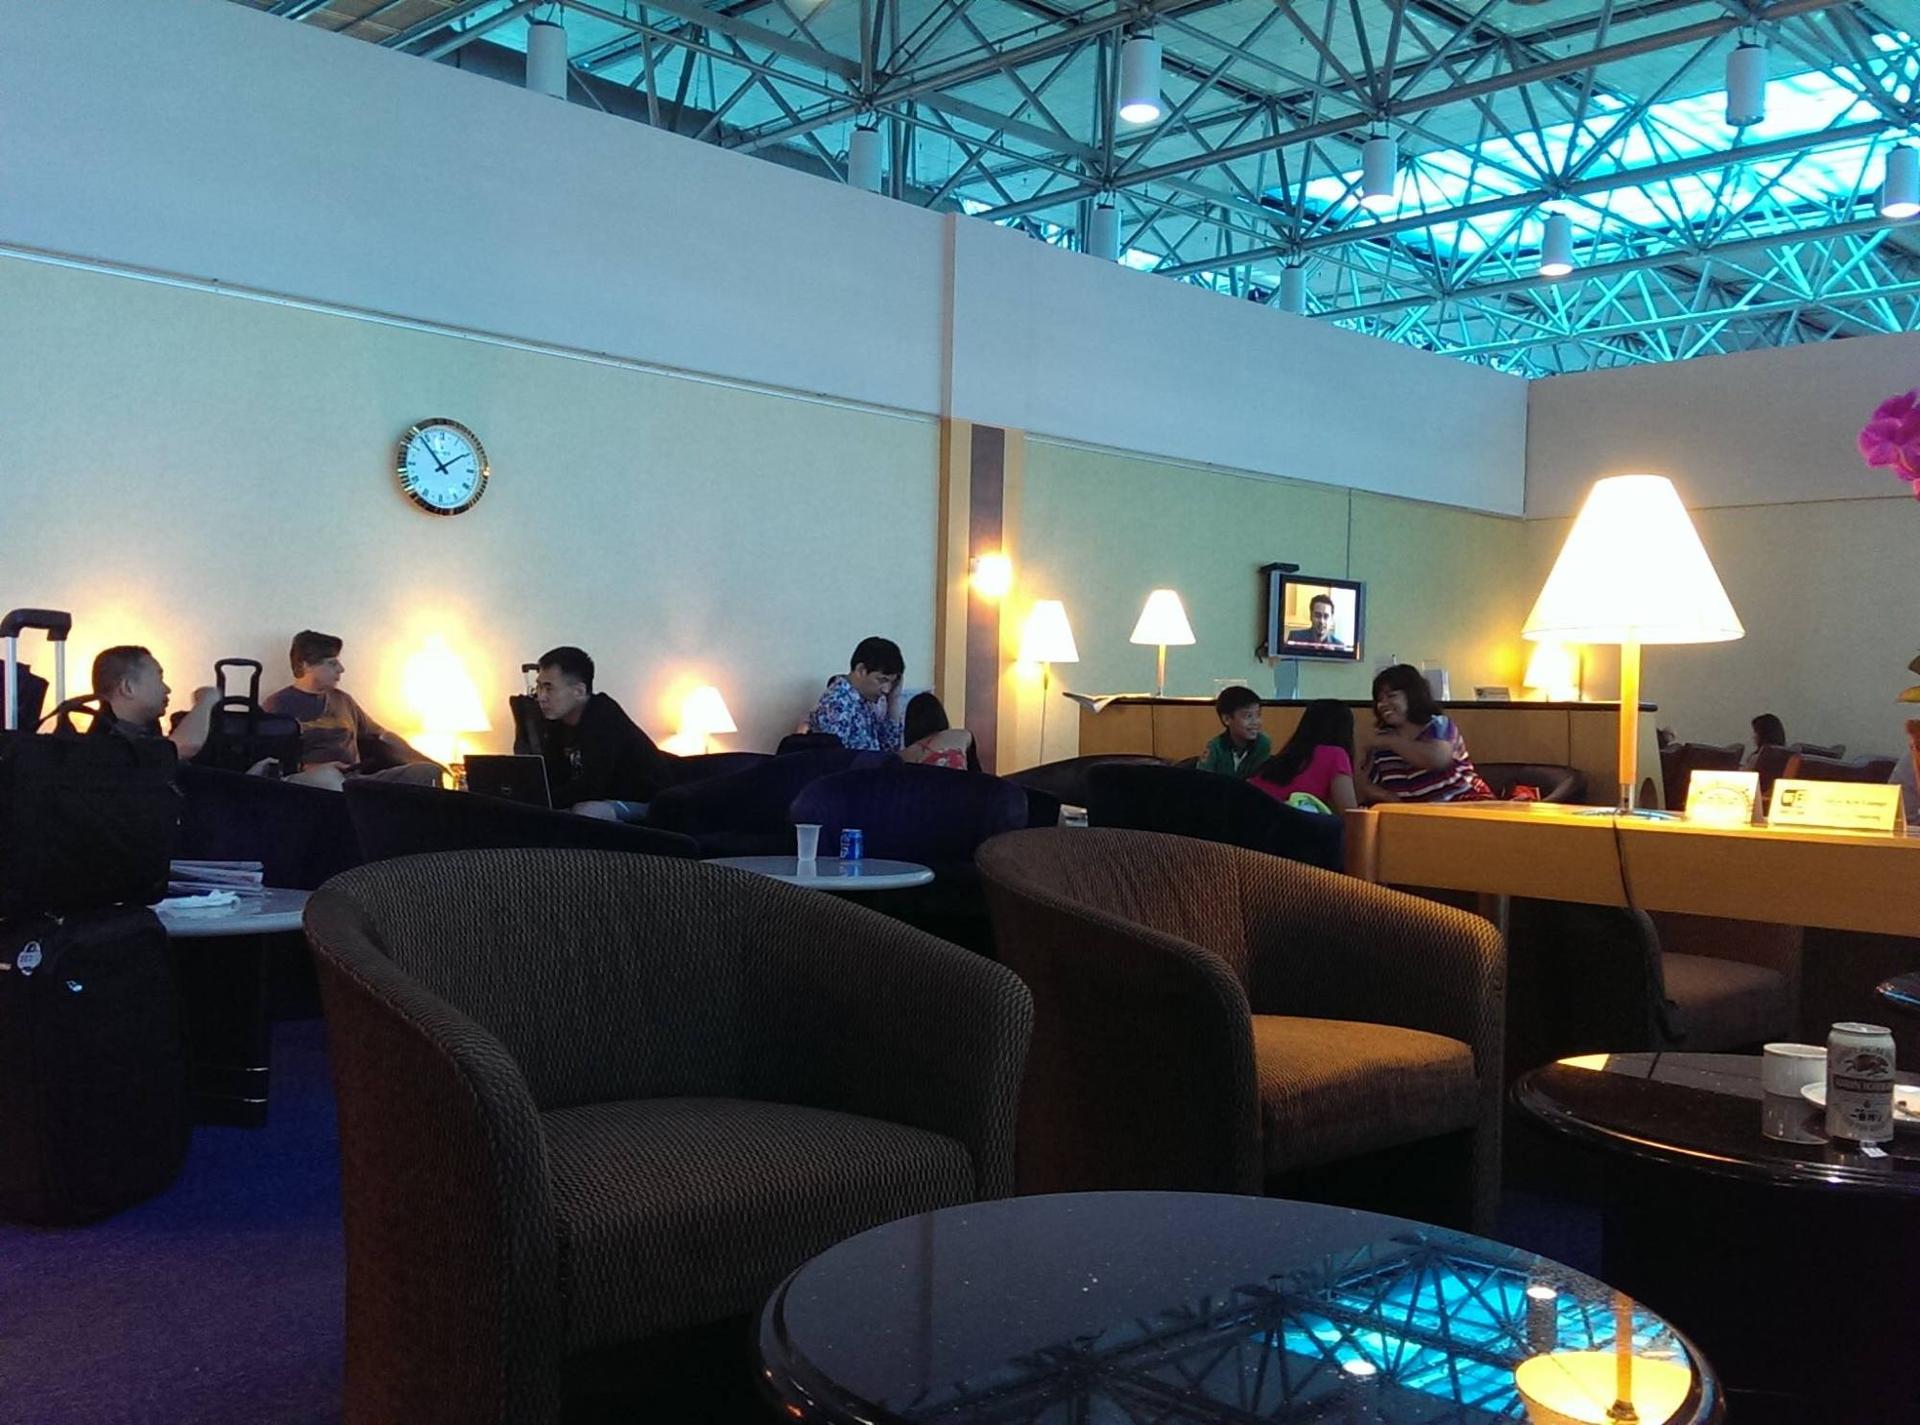 Singapore Airlines SilverKris Business Class Lounge image 7 of 14